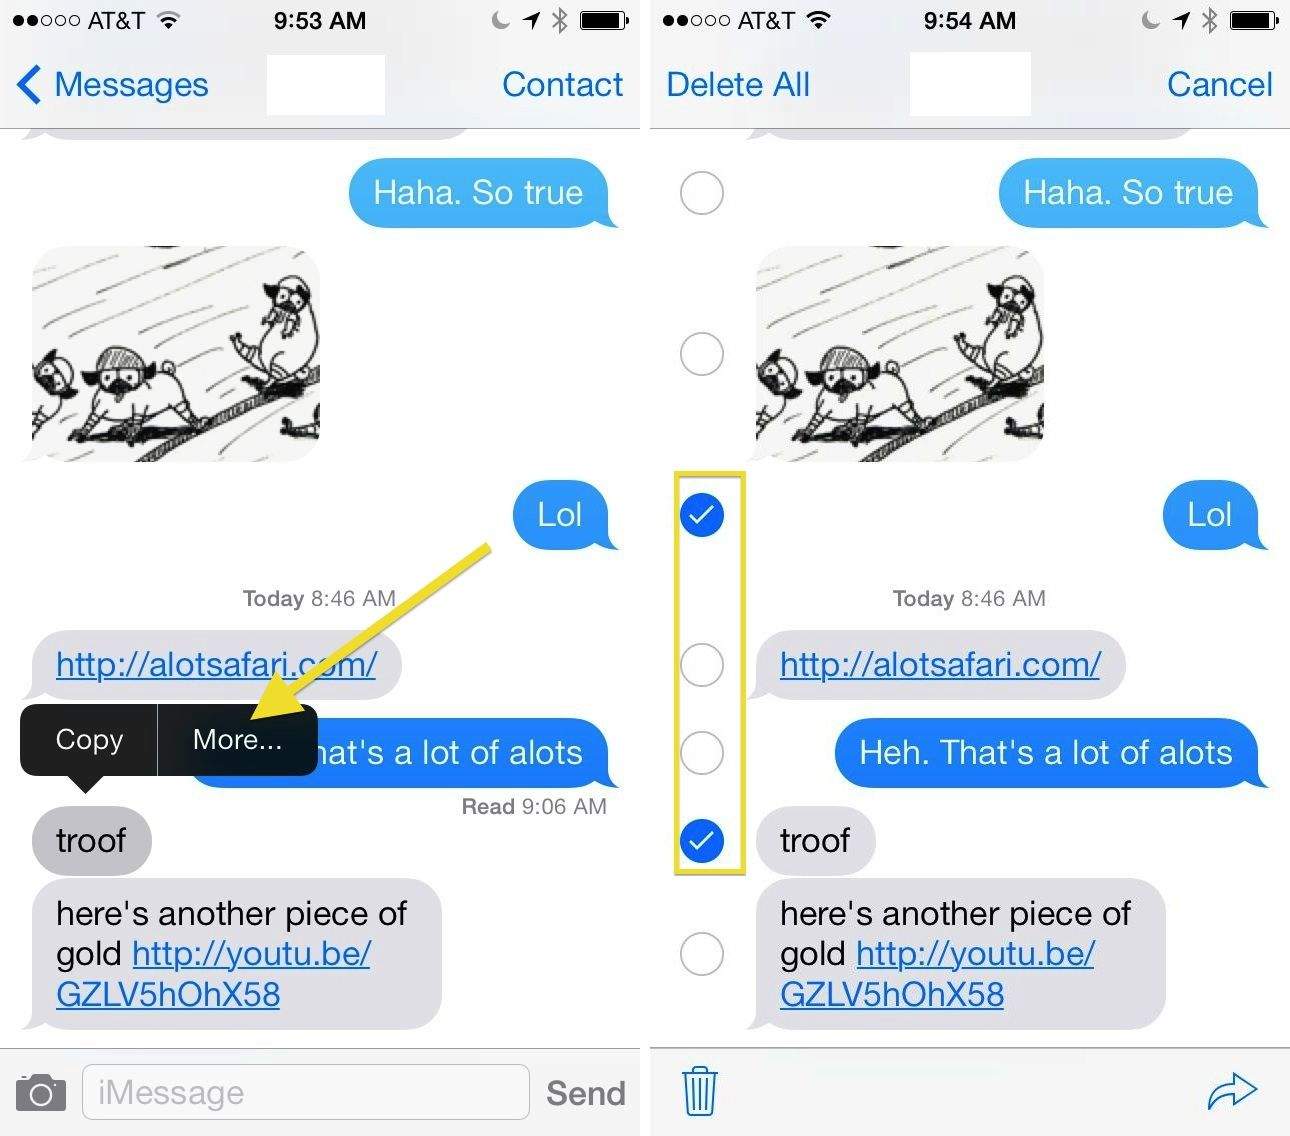 How To Delete Text Messages From Your iPhone In iOS 7 [iOS